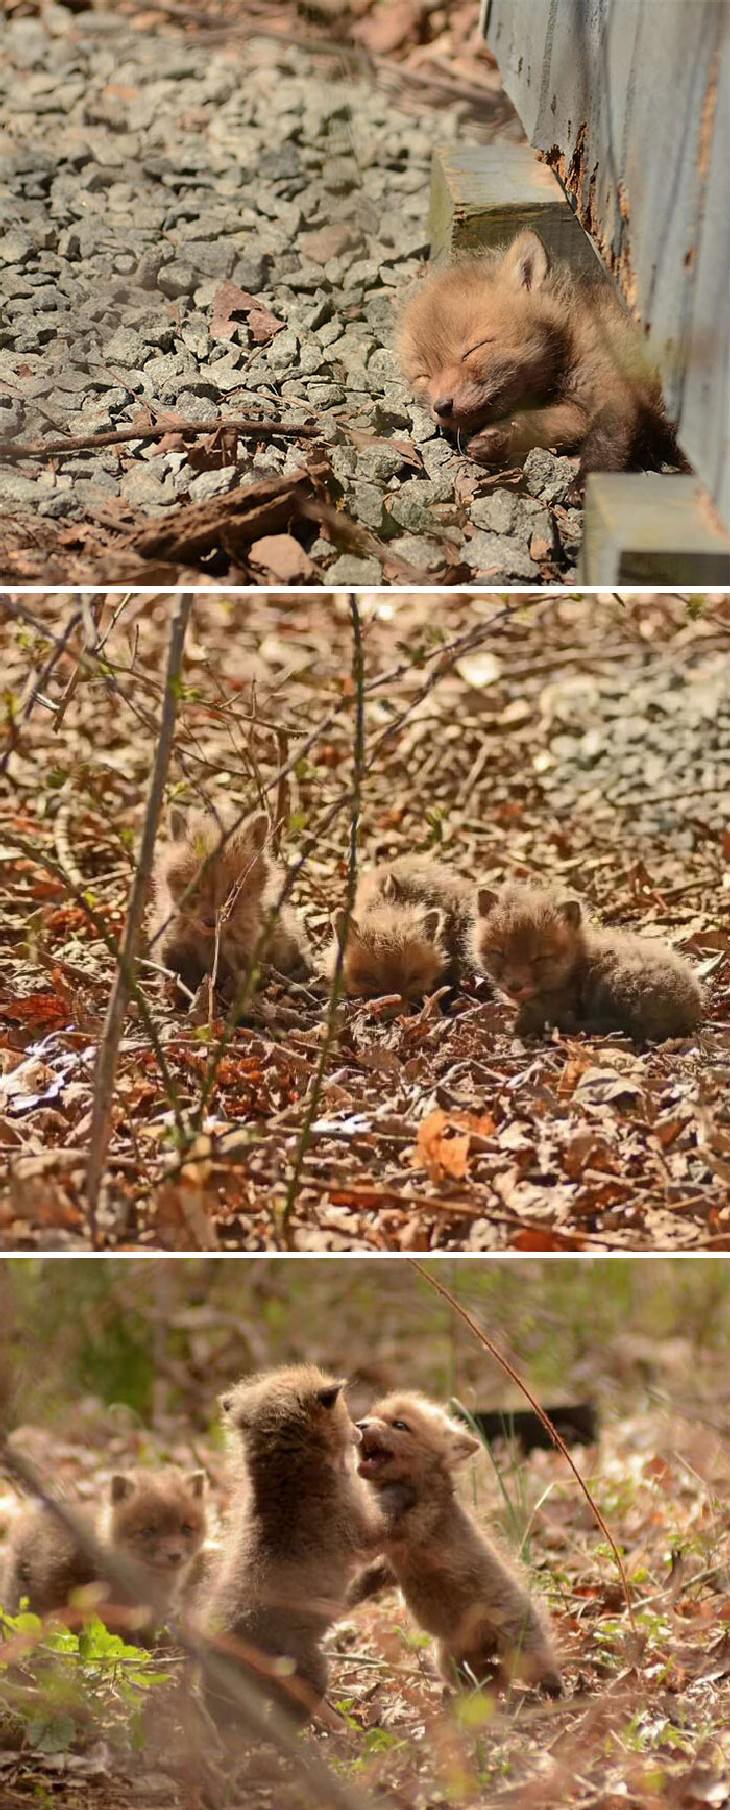 People Befriended Foxes A Group of Baby Foxes Found In Backyard in New Jersey